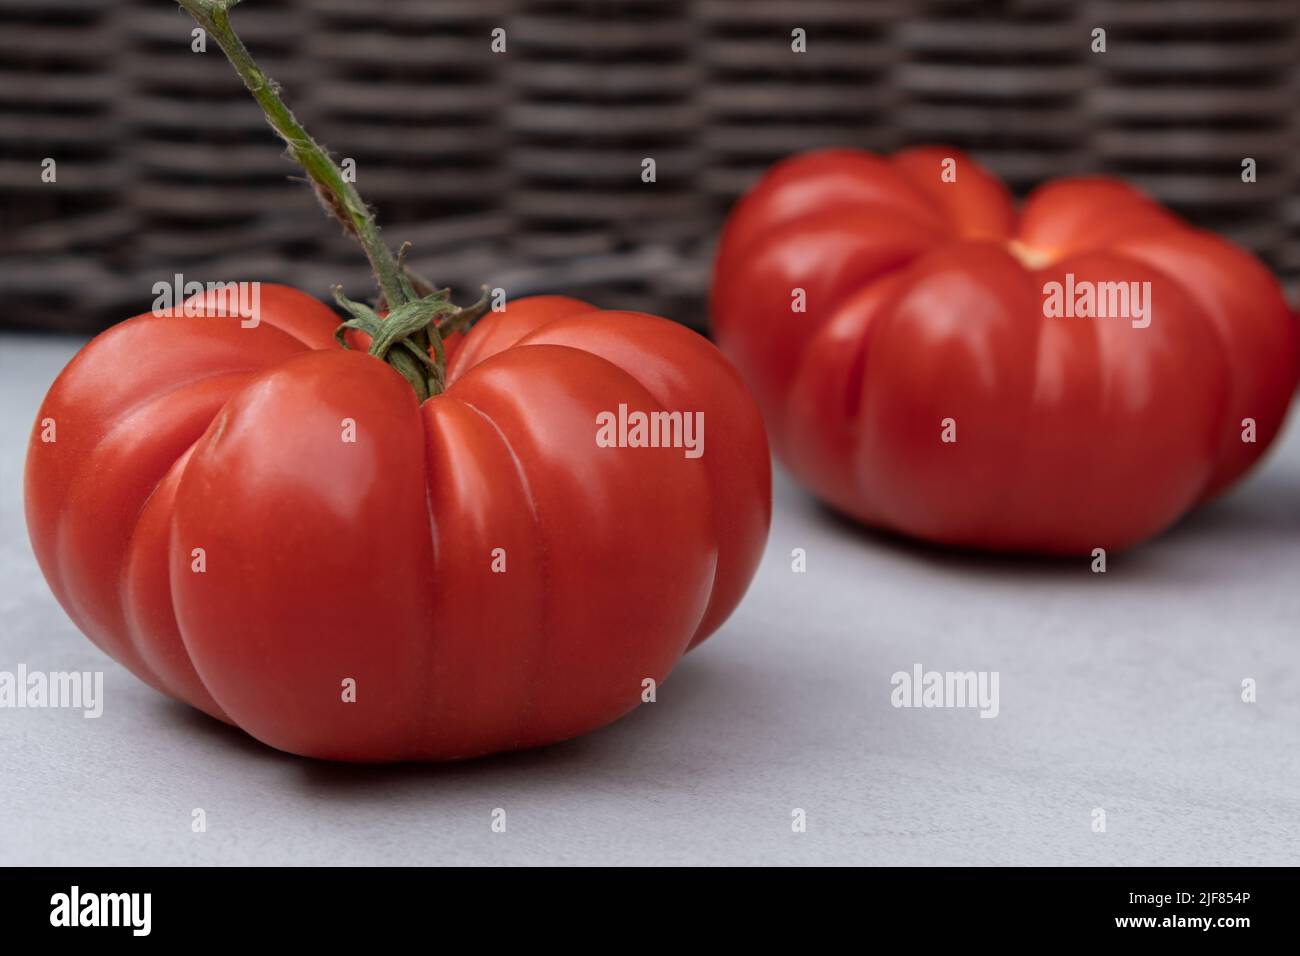 Tomate Oxheart, tomate de type beefsteak Banque D'Images